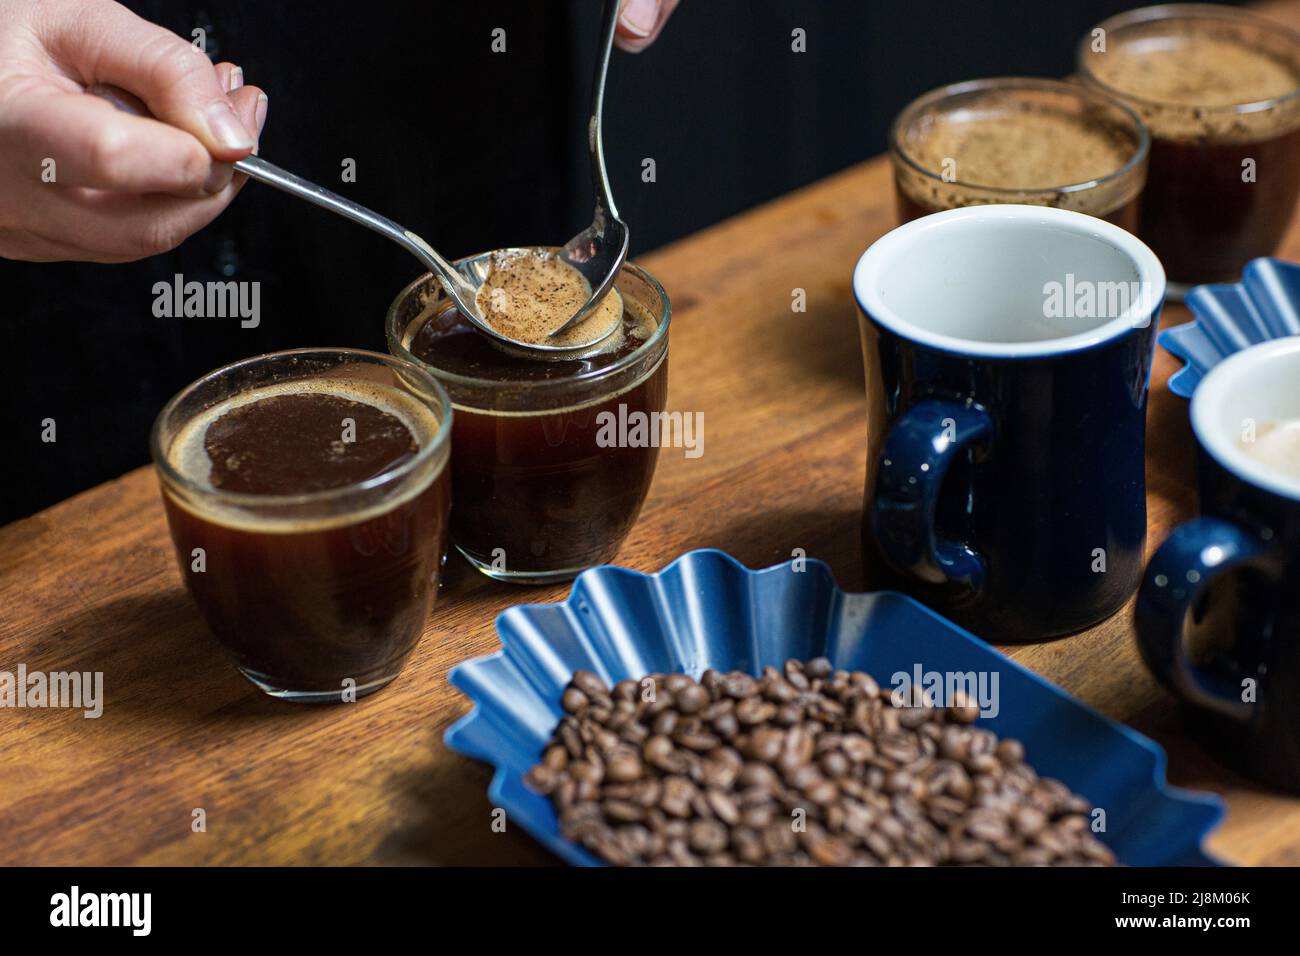 Professional coffee cupping and coffee tasting Stock Photo